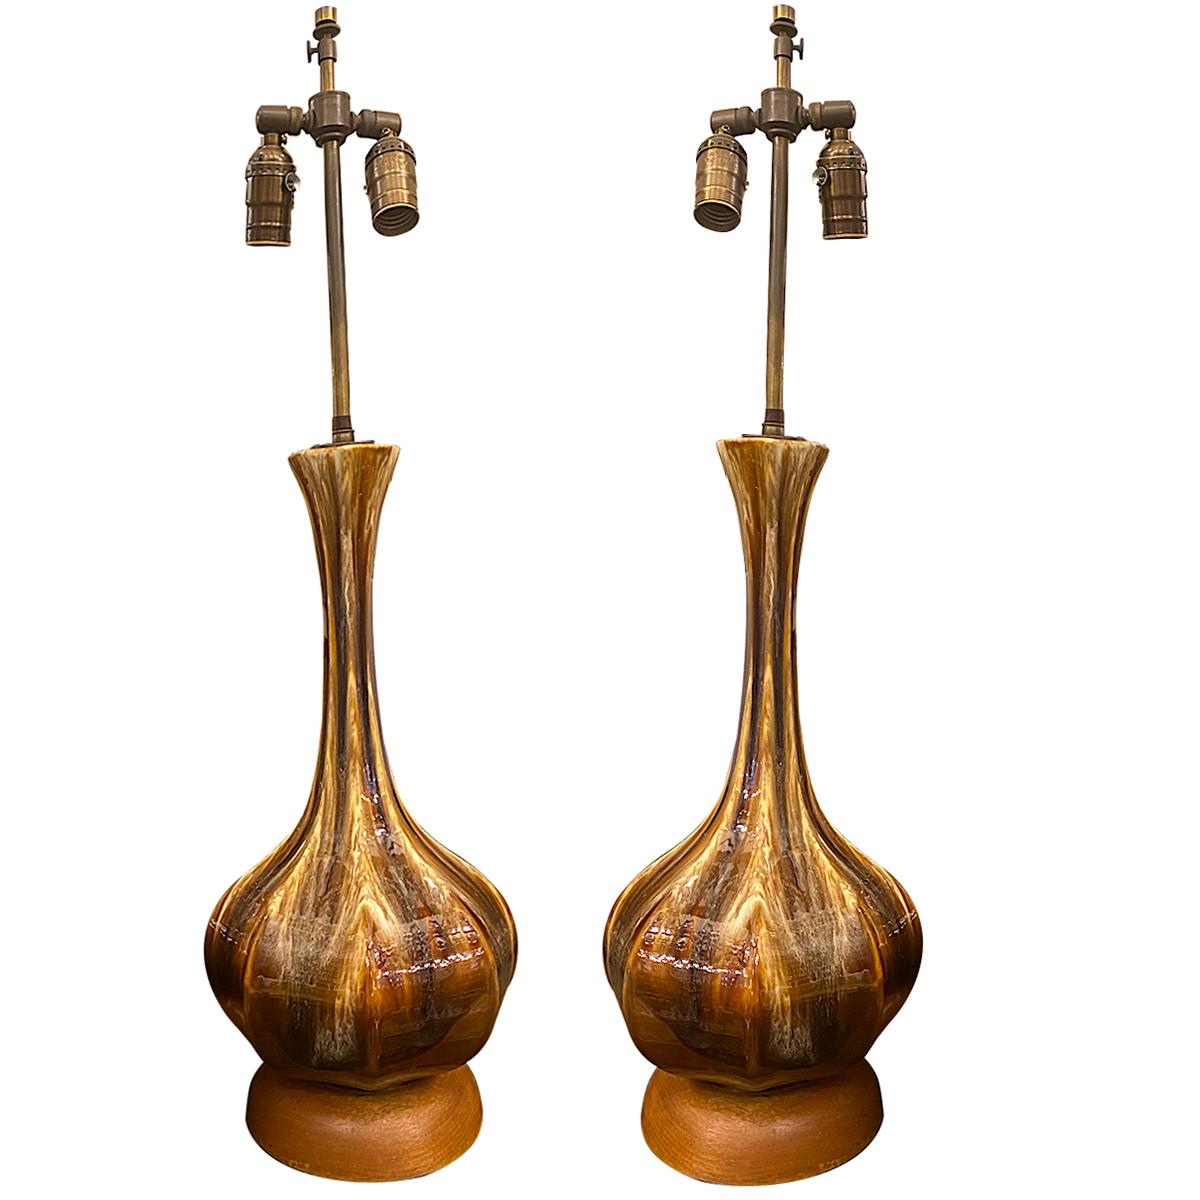 Pair of circa 1960's Italian porcelain table lamps with wooden bases.

Measurements:
Height of body: 20.25